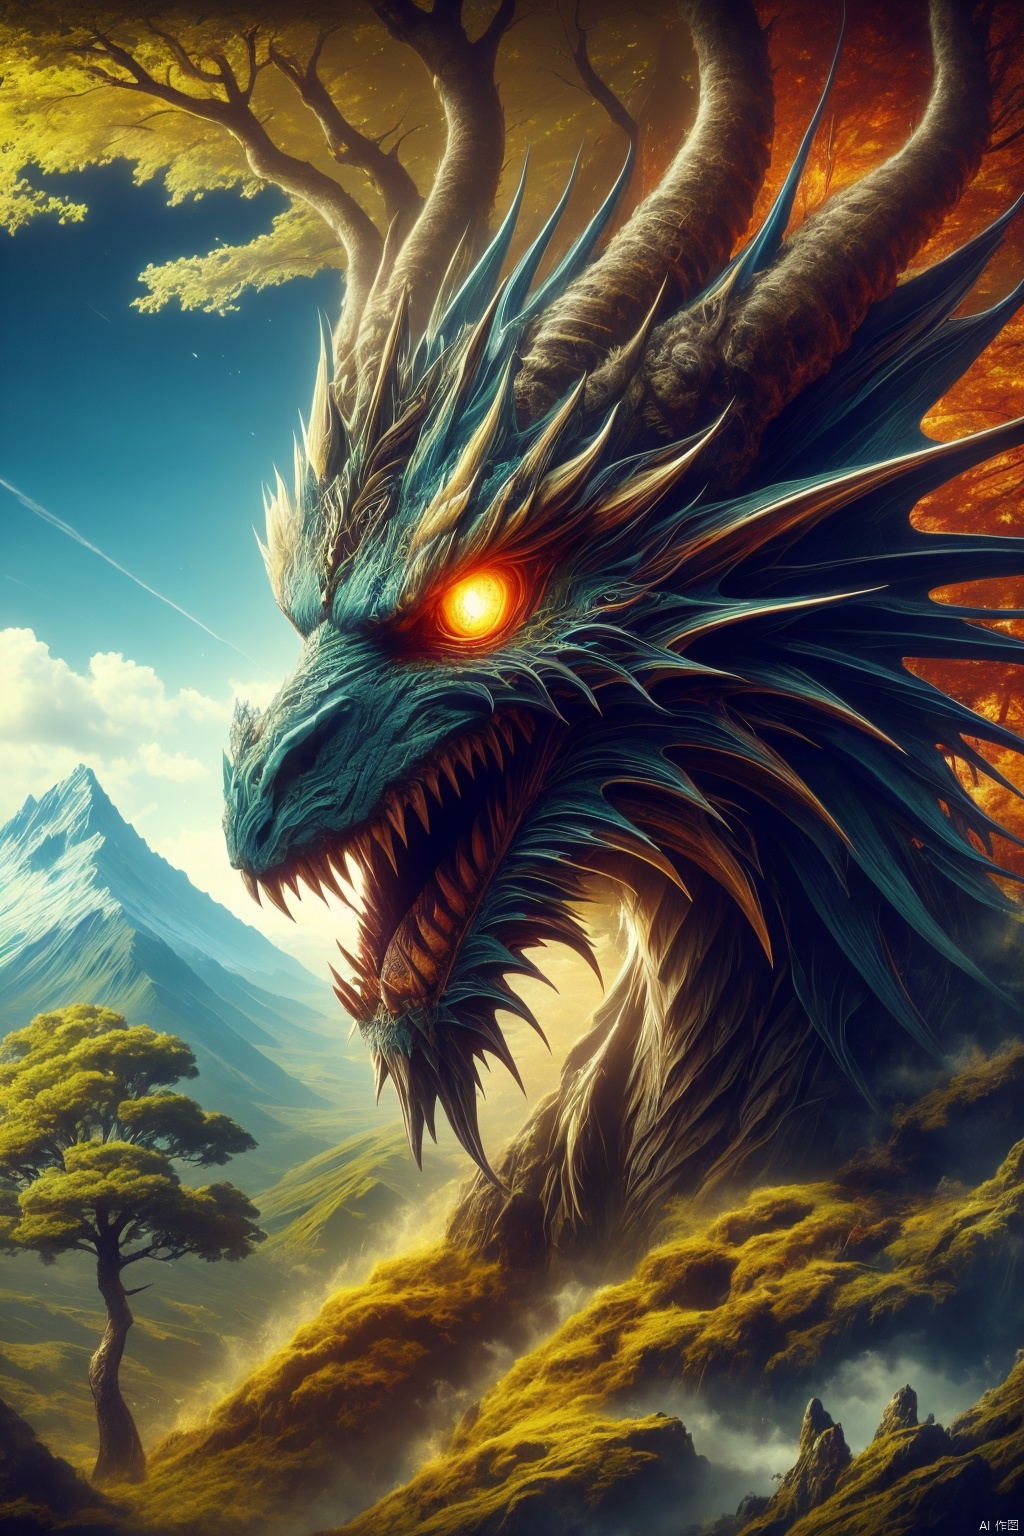 outdoors, sky, cloud, tree, no humans, glowing, nature, scenery, glowing eyes, forest, monster, mountain, dragon